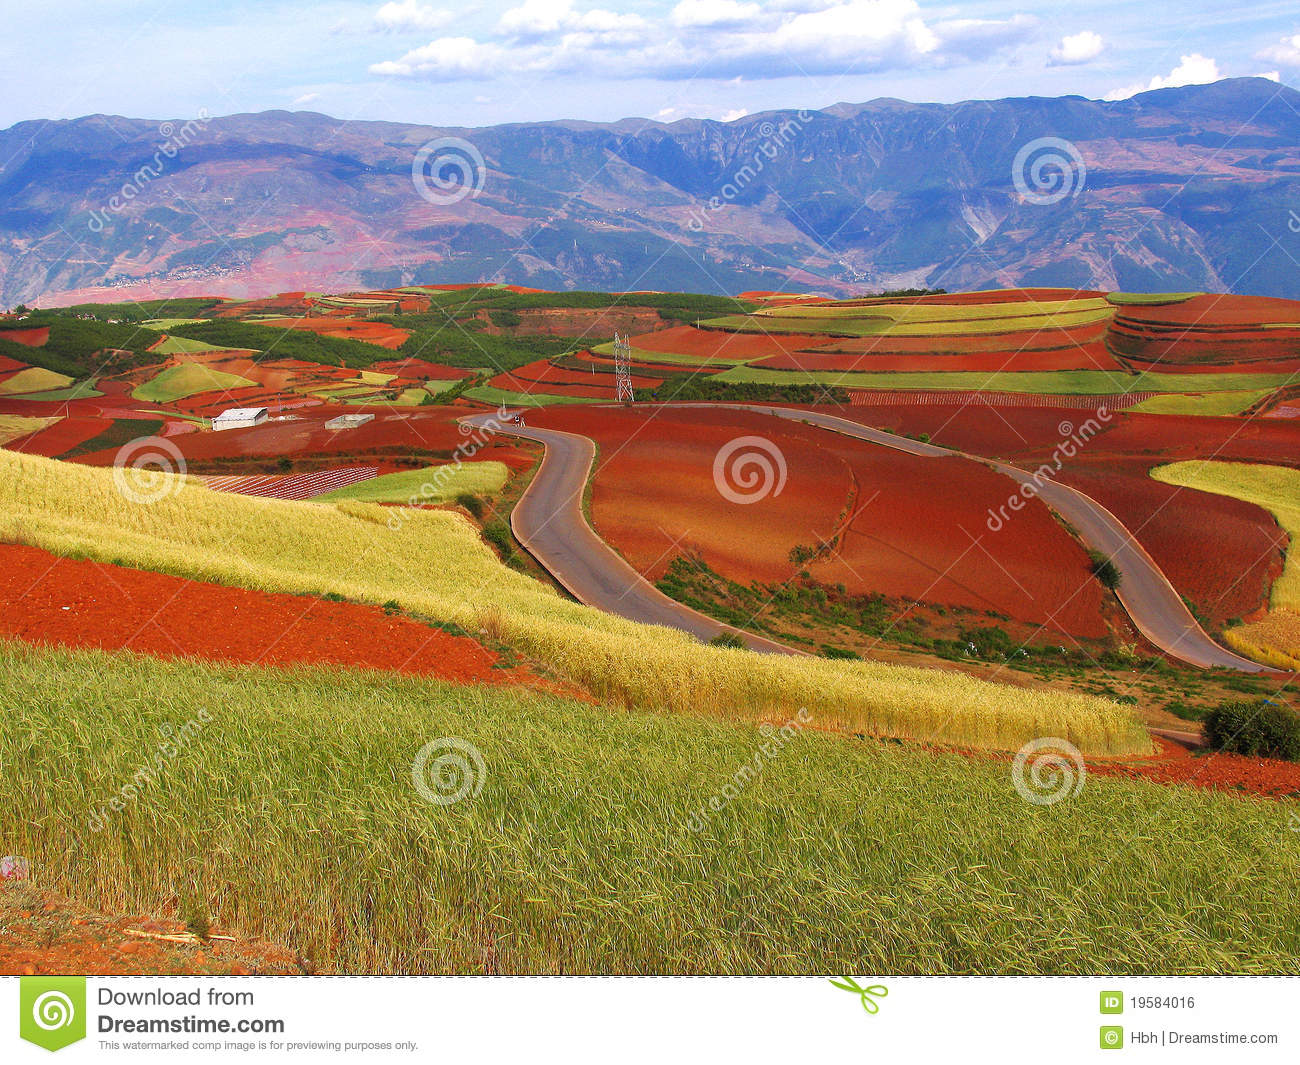     Large Amounts Of Iron The Color Is Red Soil The Main Crop Is Barley